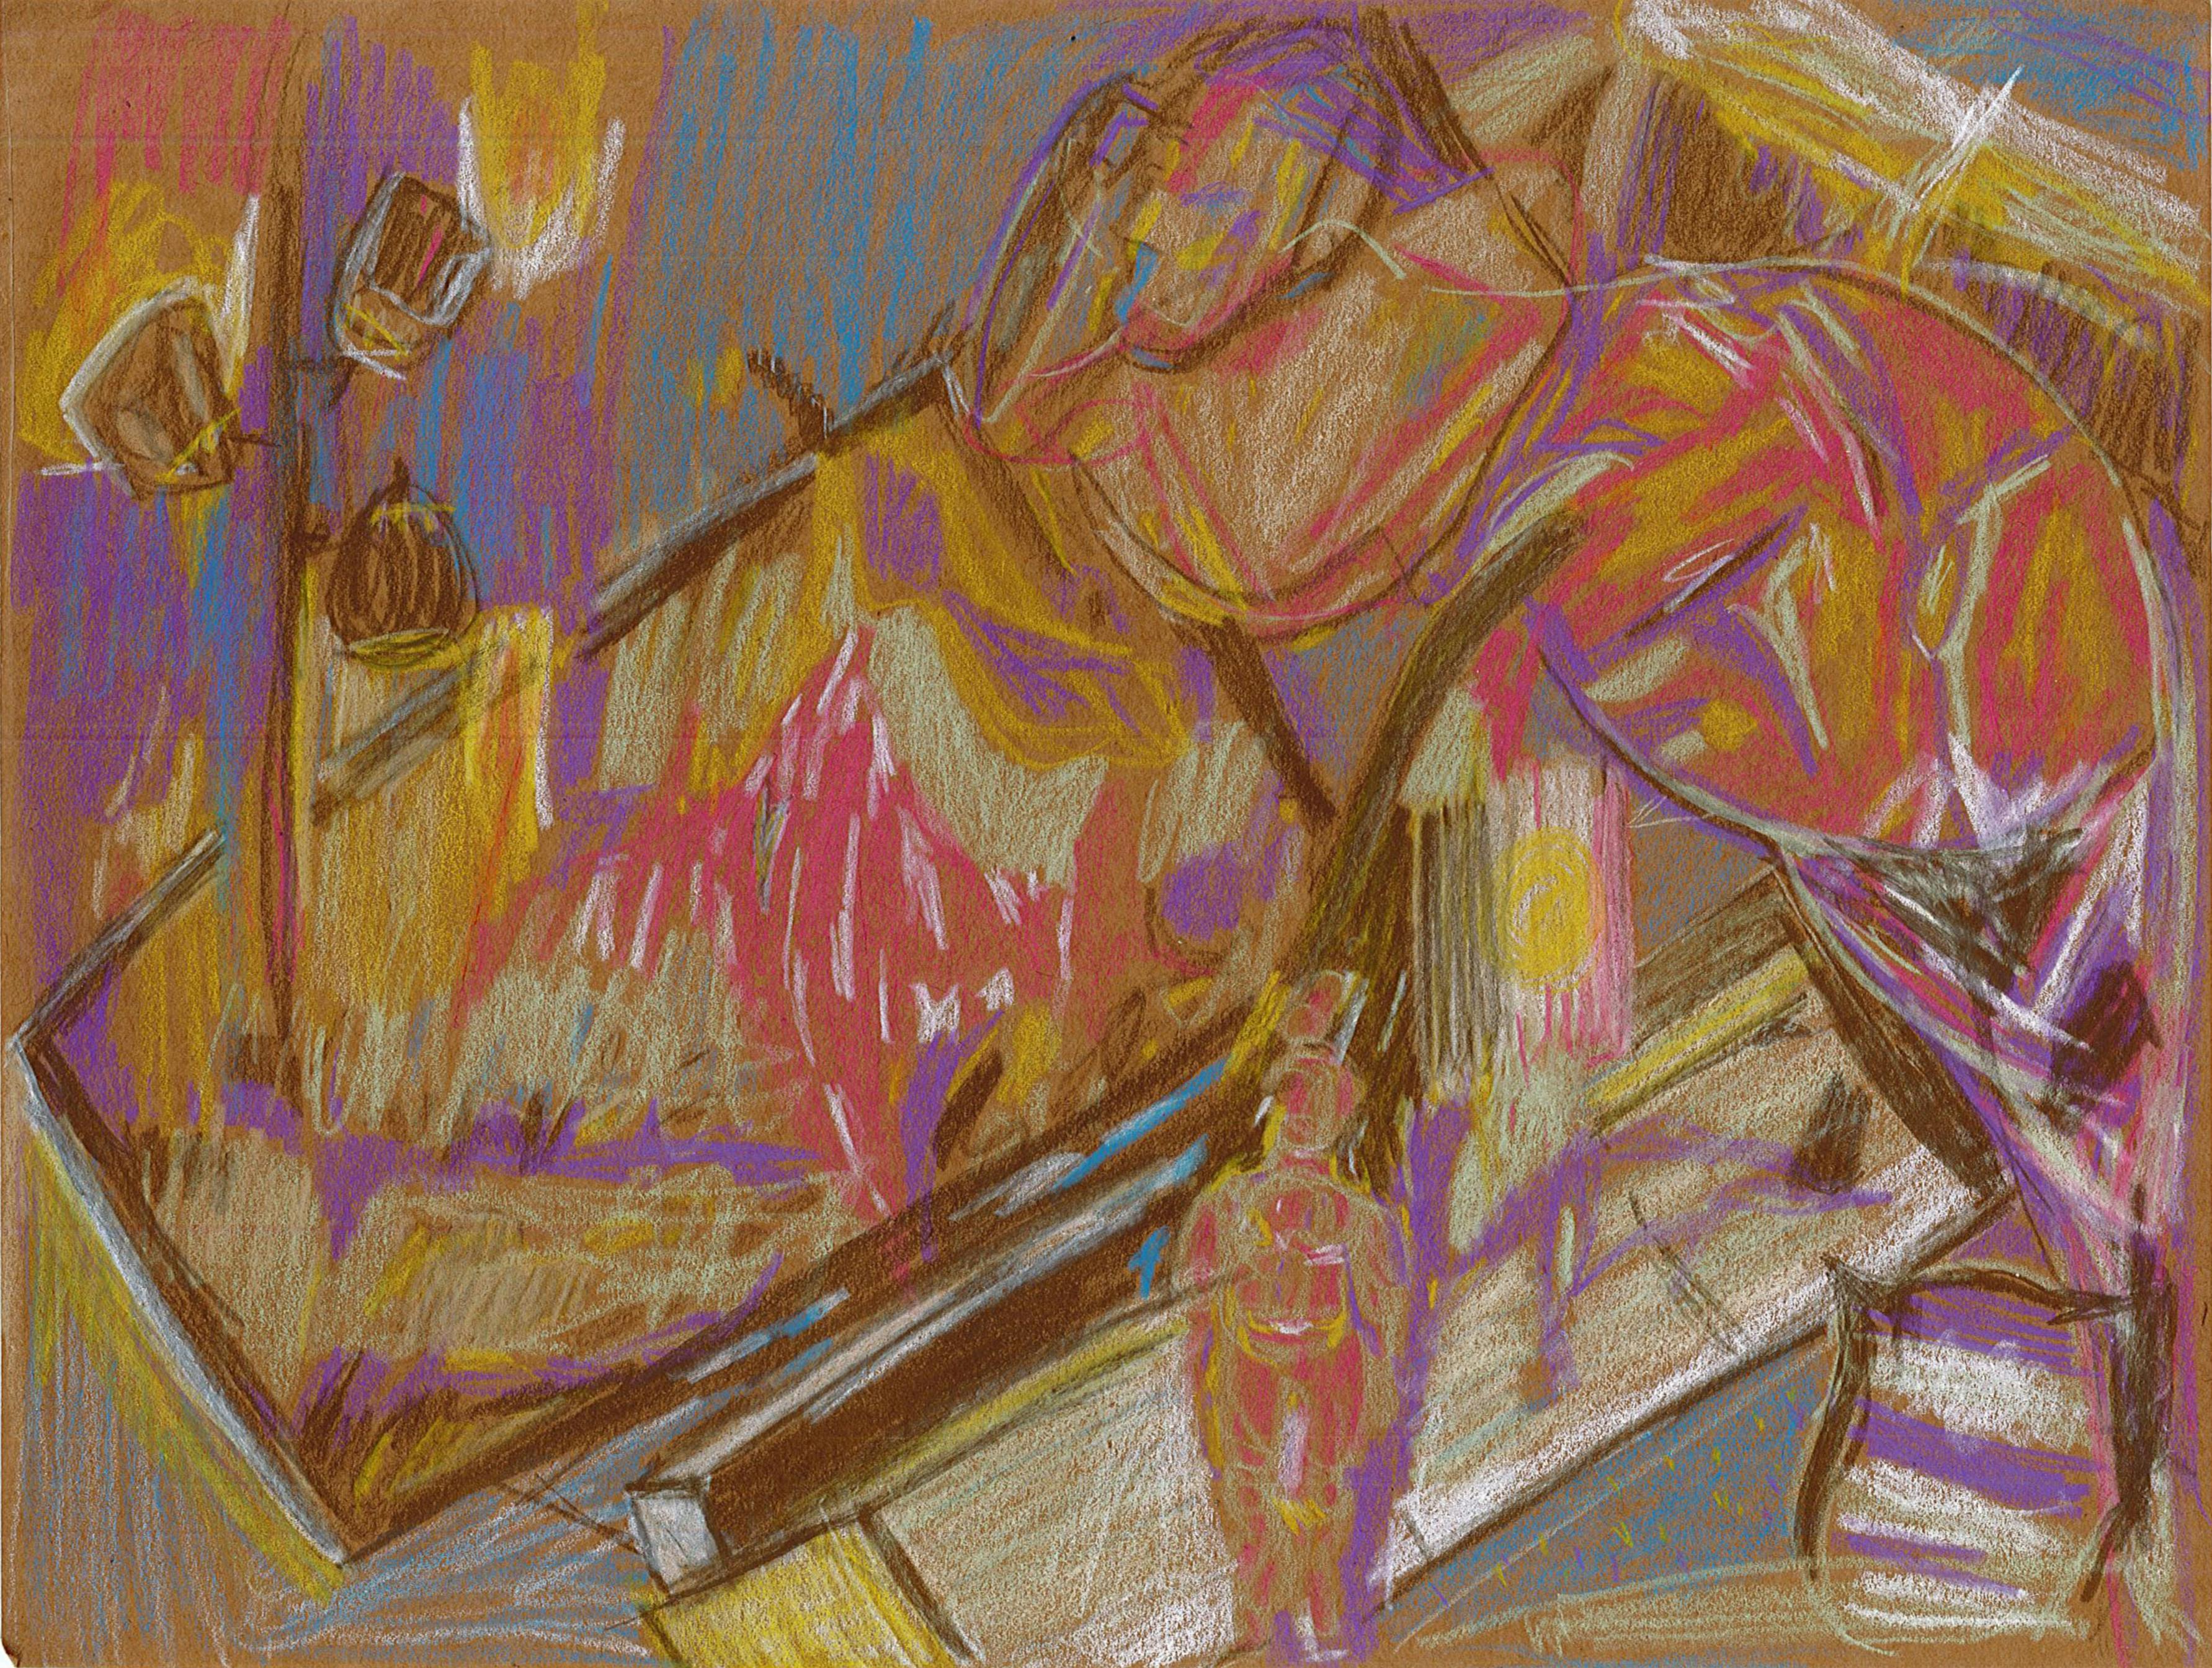 An abstract drawing of a man
watching TV done in colored pencil on craft paper with prominent pink, purple, yellow, and blue accents.